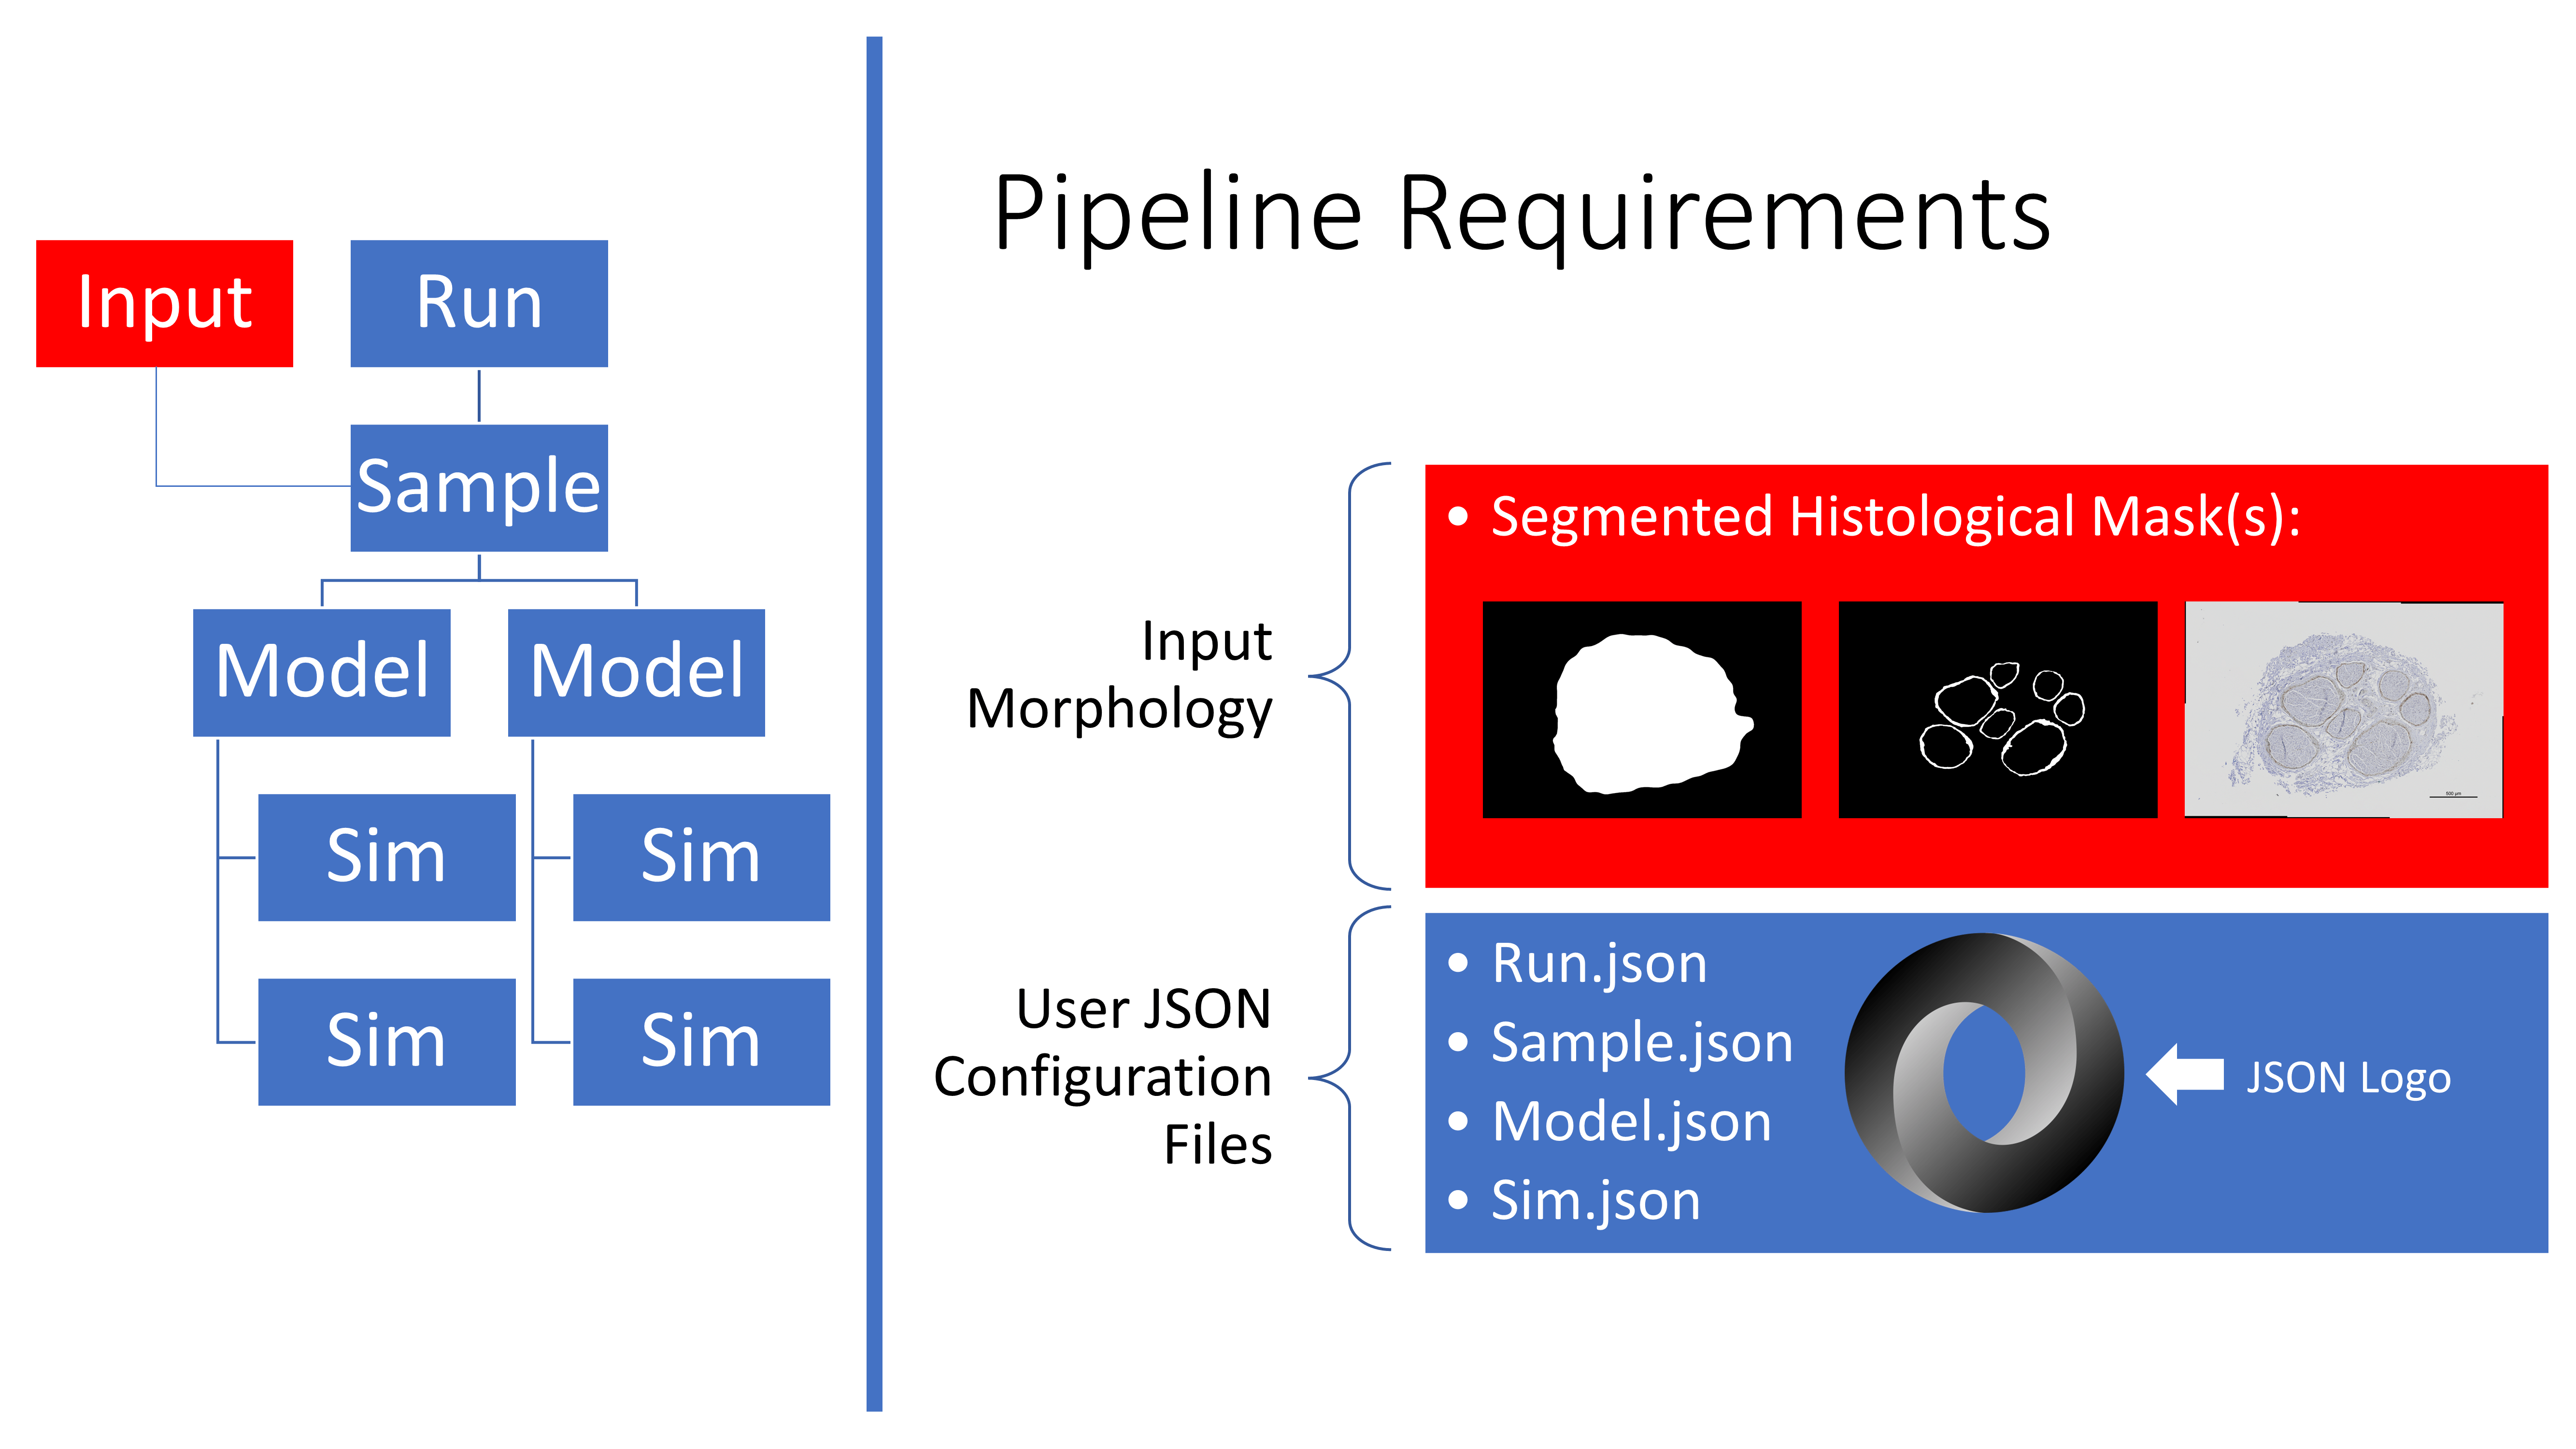 _images/pipeline_requirements.png